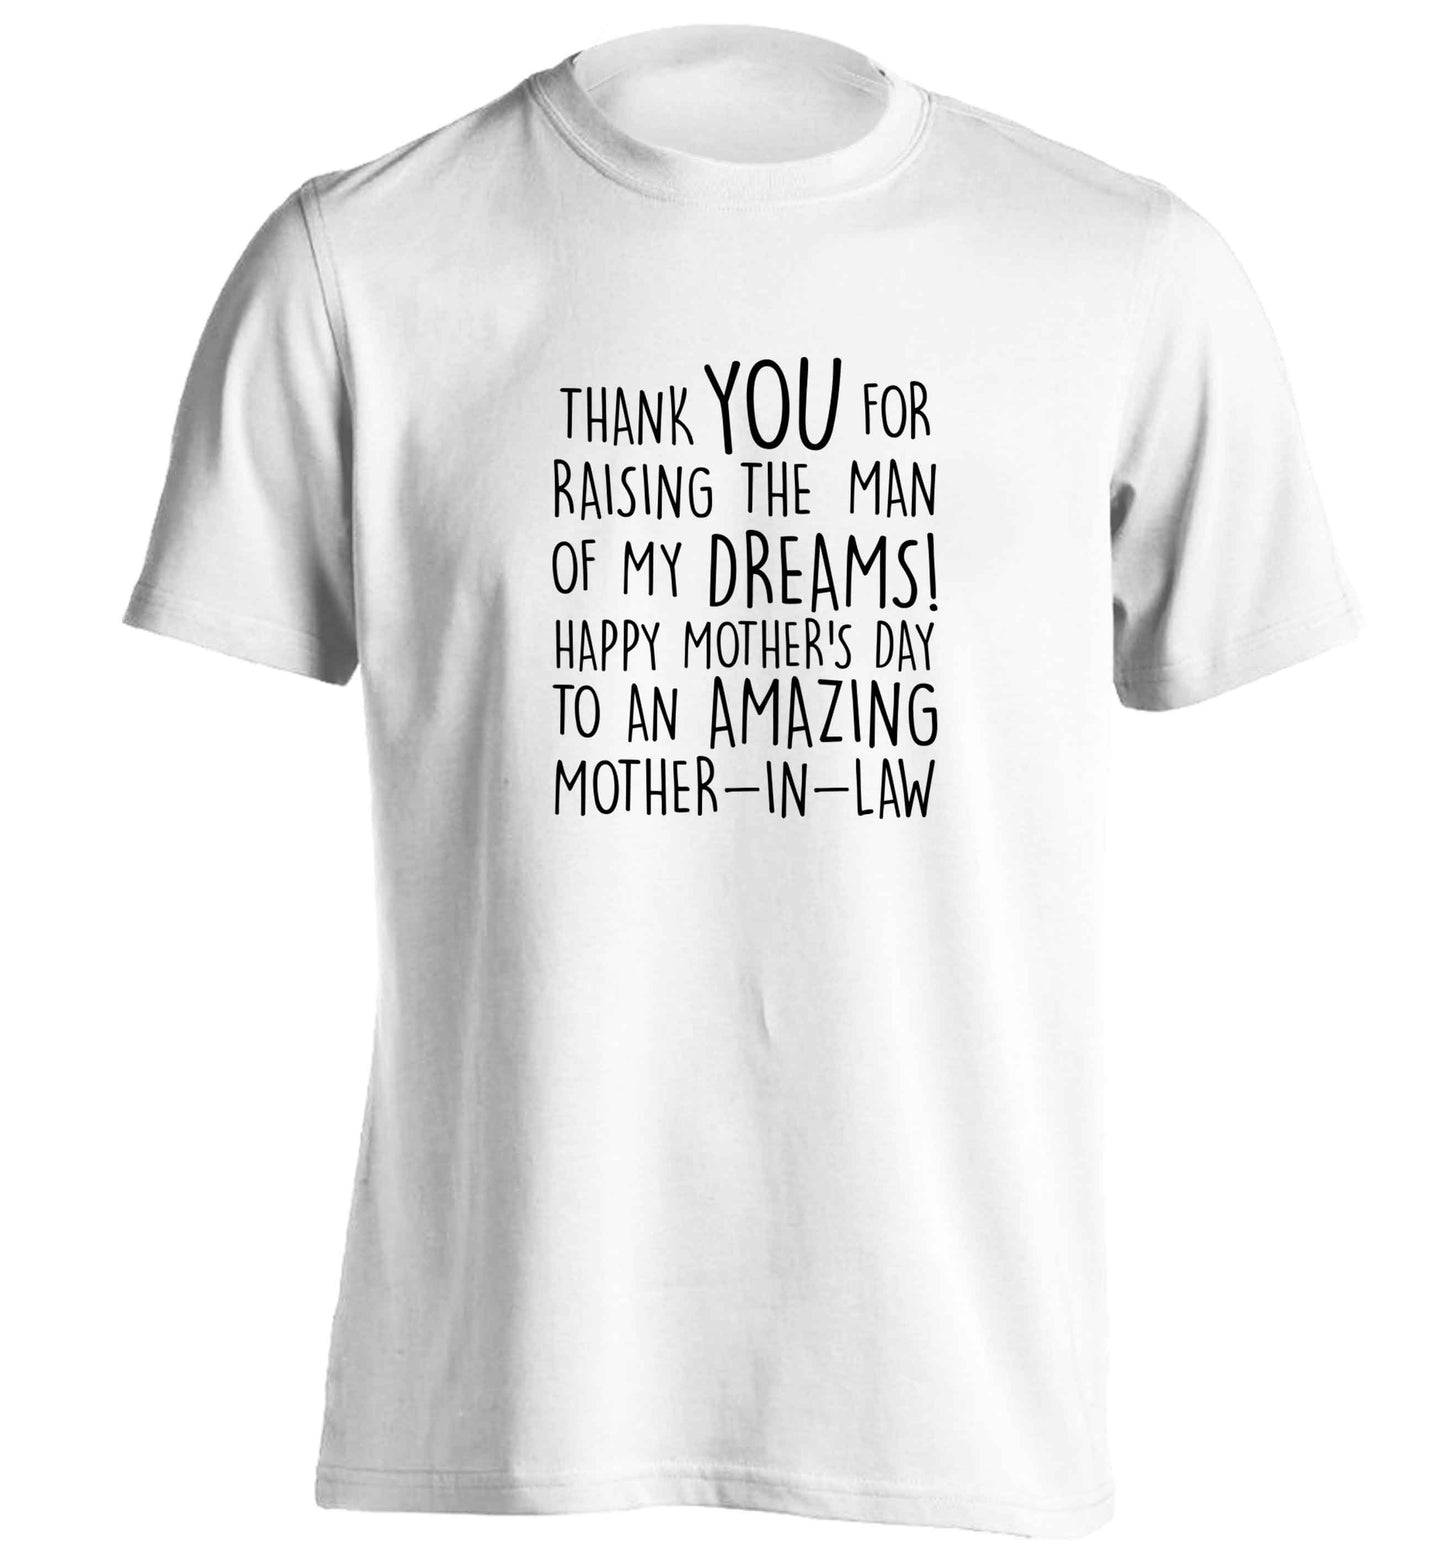 Raising the man of my dreams mother's day mother-in-law adults unisex white Tshirt 2XL